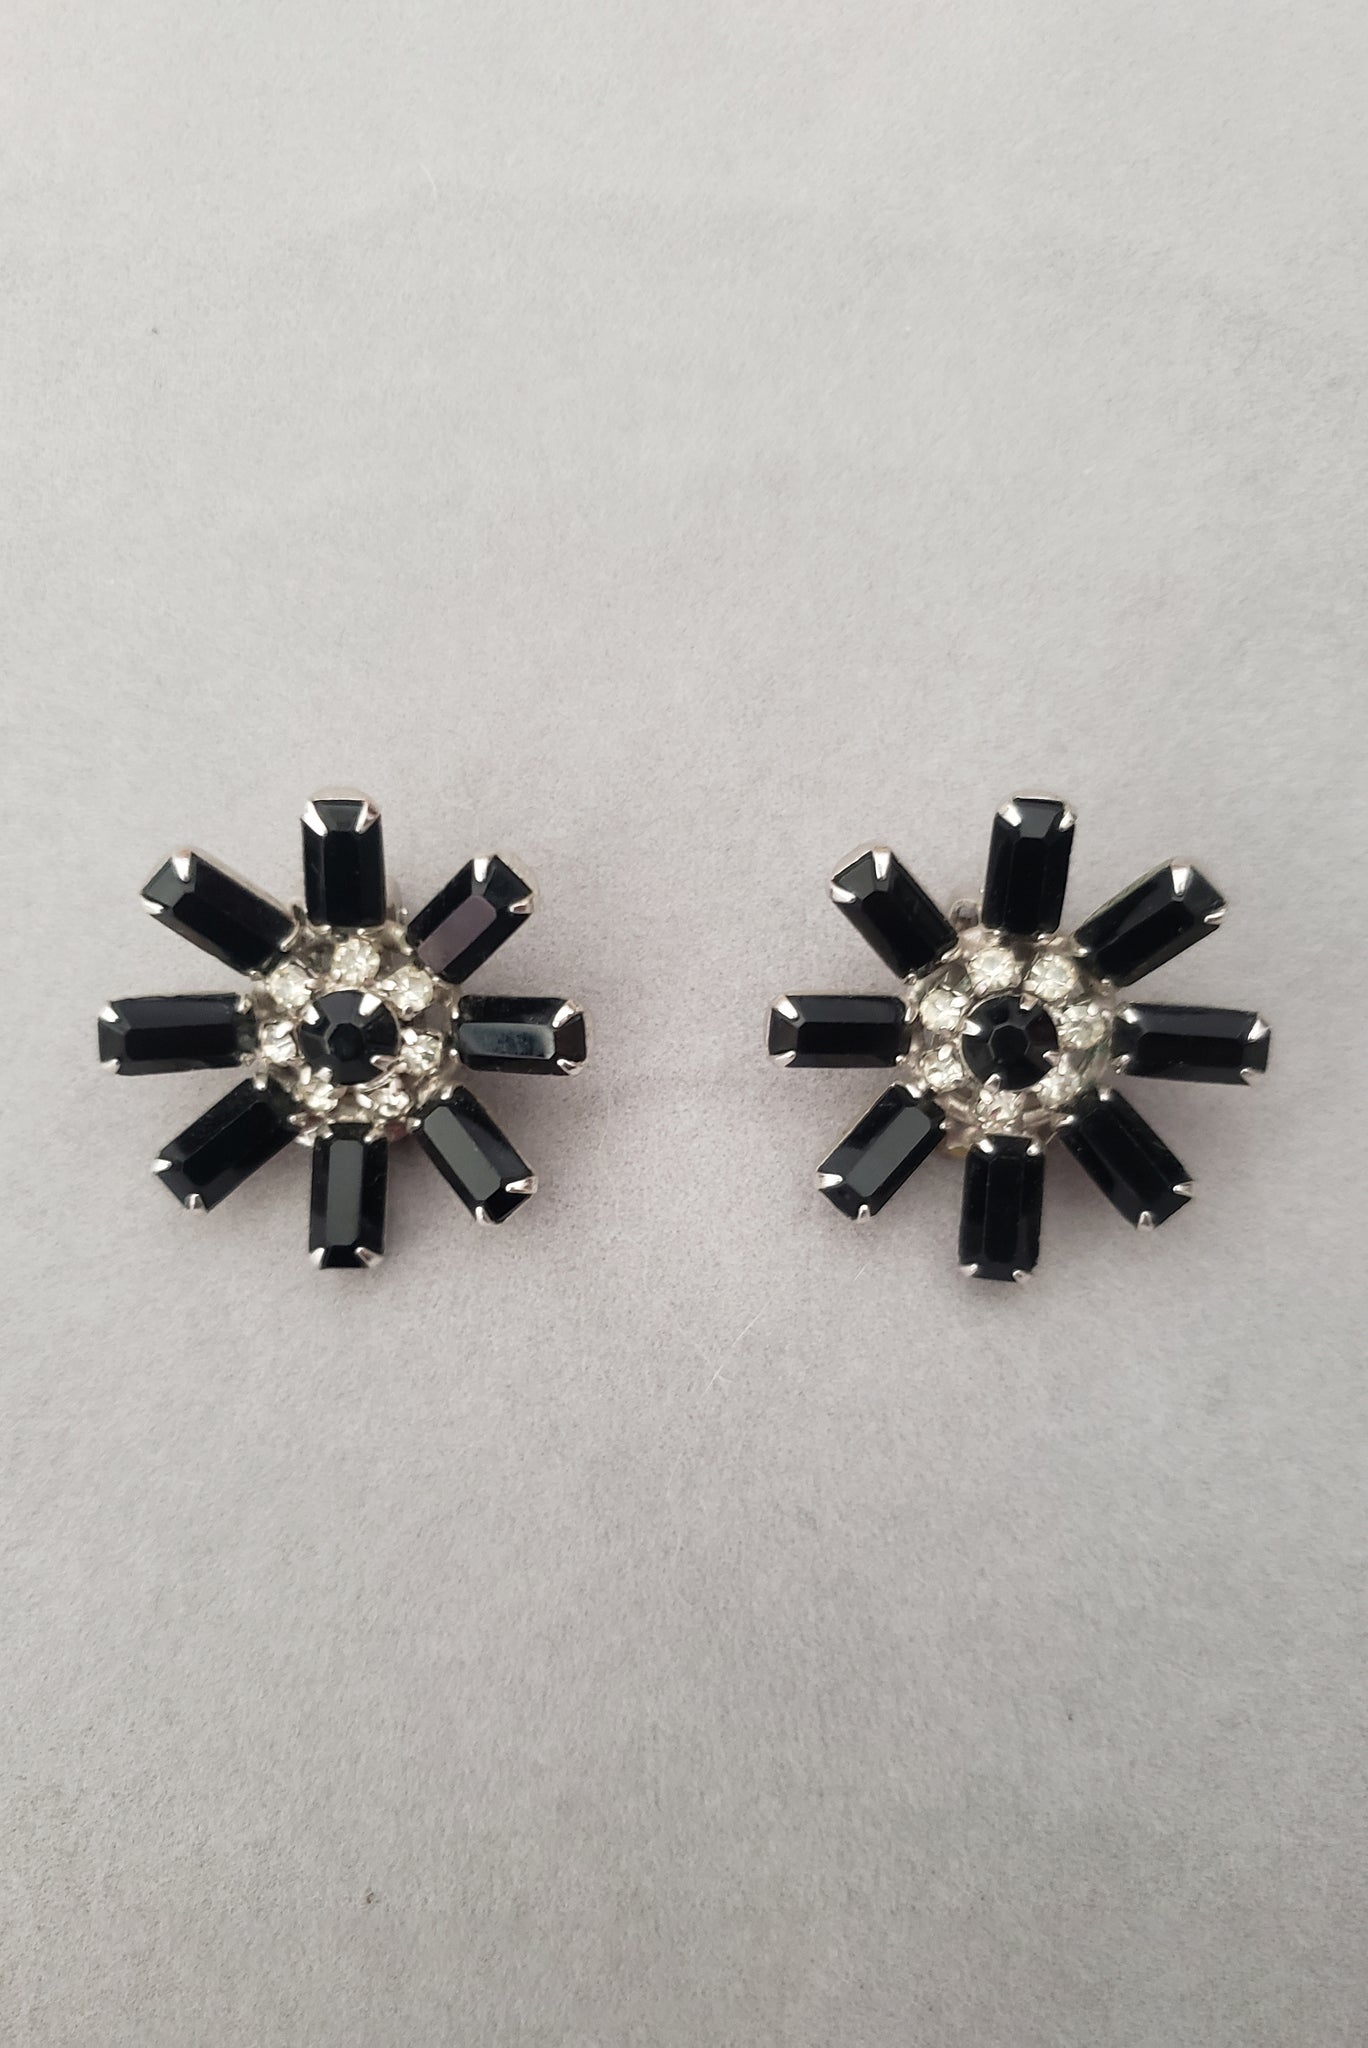 1950s Vintage Black and Clear Rhinestone Flower Clip-On Earrings